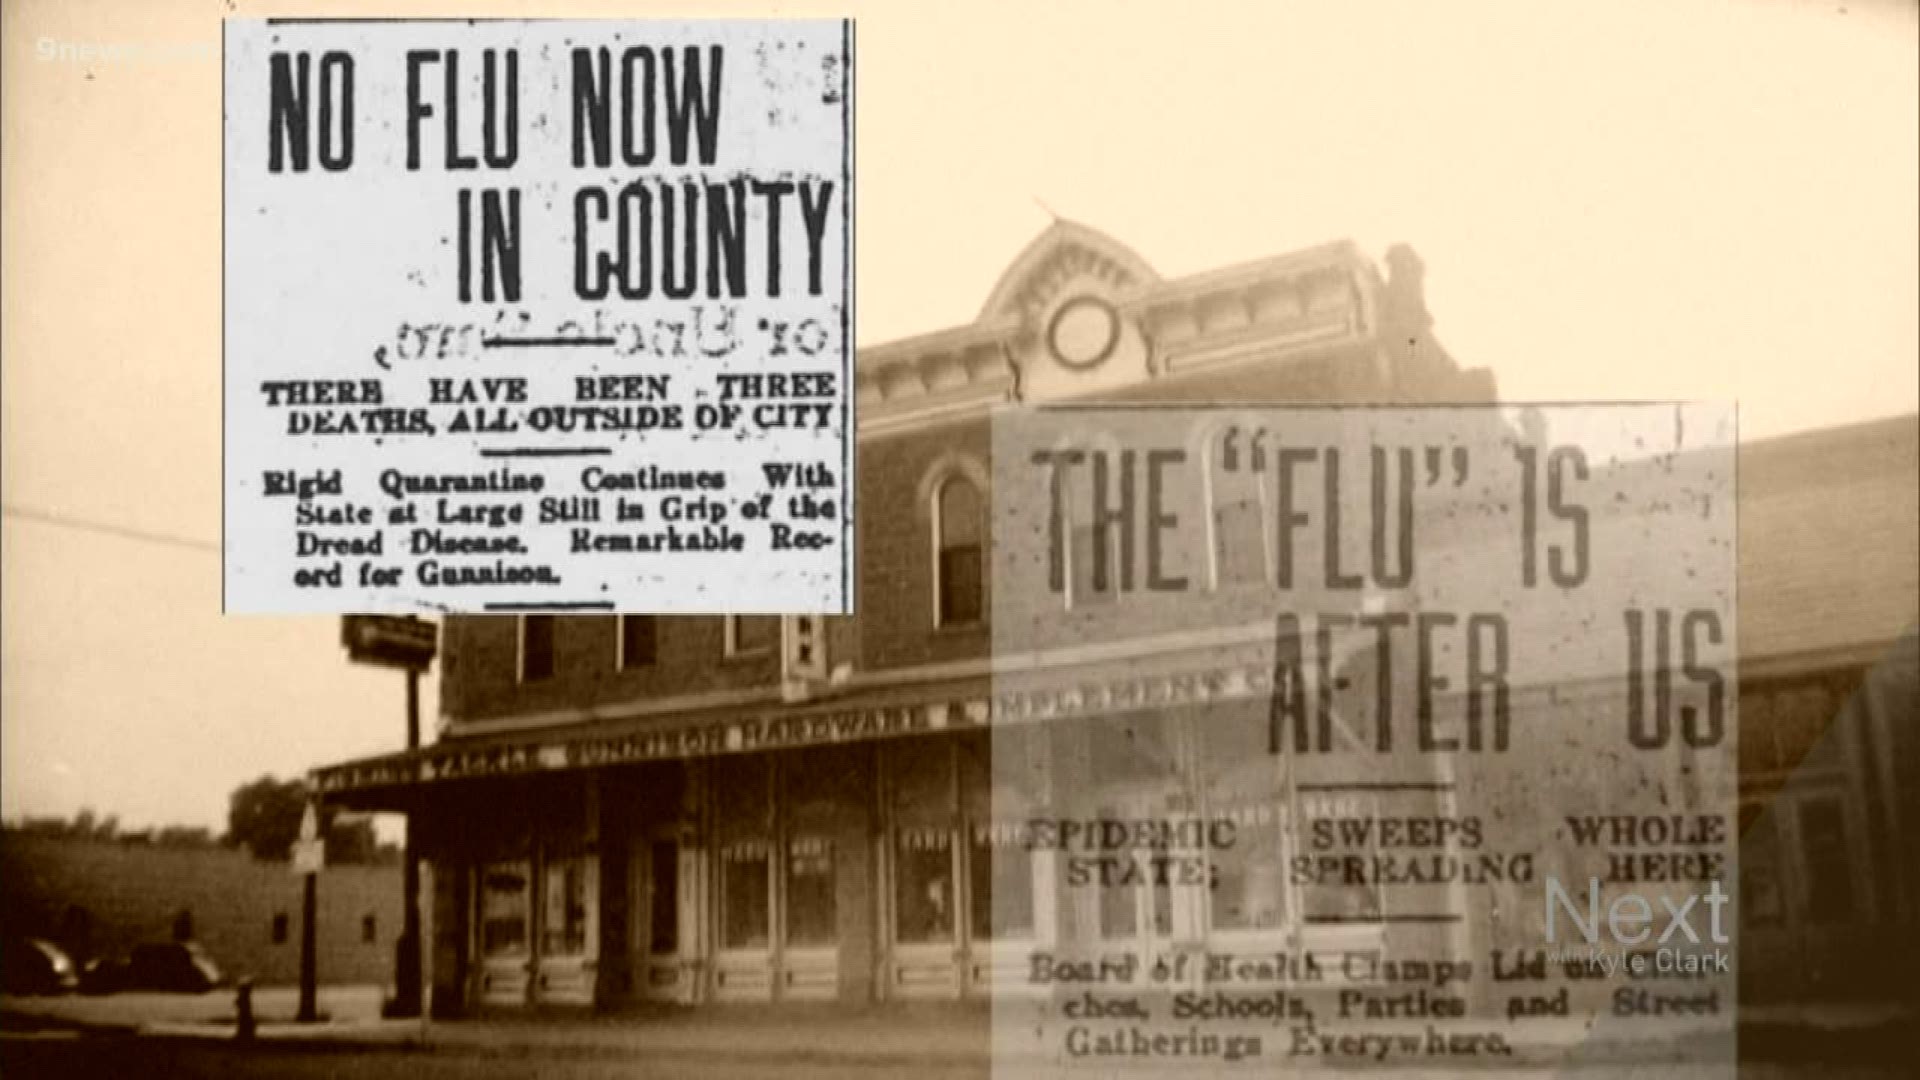 While the flu killed about 8,000 people in Colorado that year, Gunnison sequestered itself and had next to no cases.